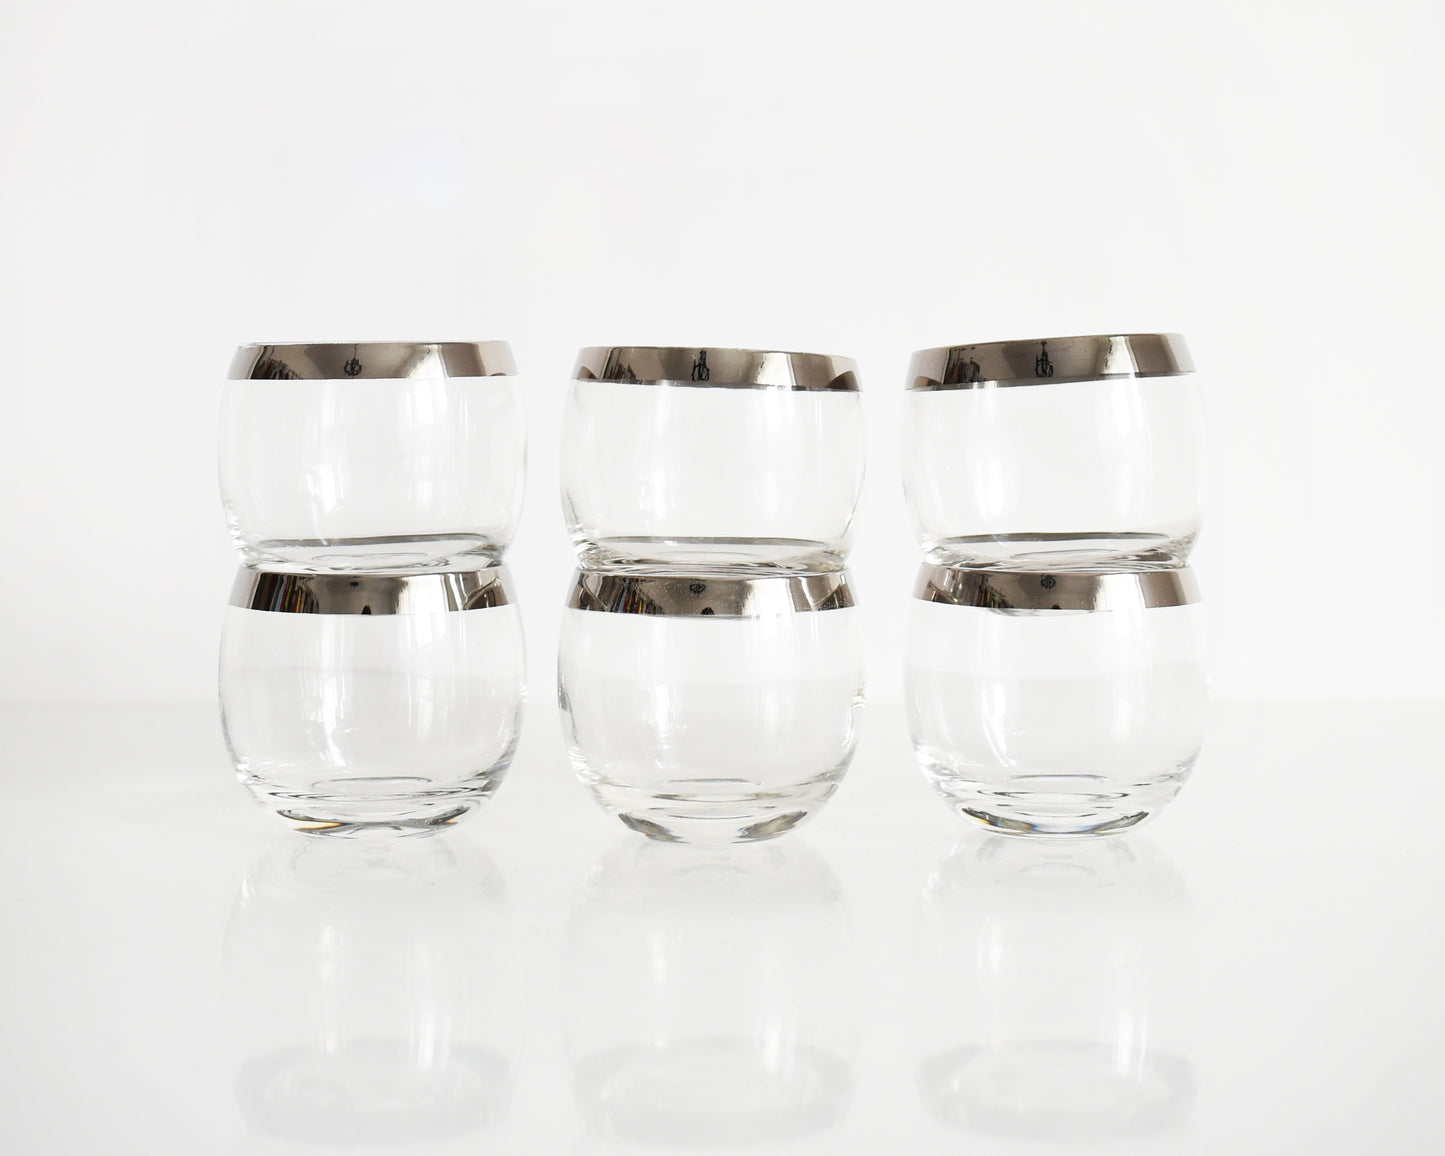 A set of six mid century roly poly glasses with silver rims. The glasses are in a stacked in twos in this photo